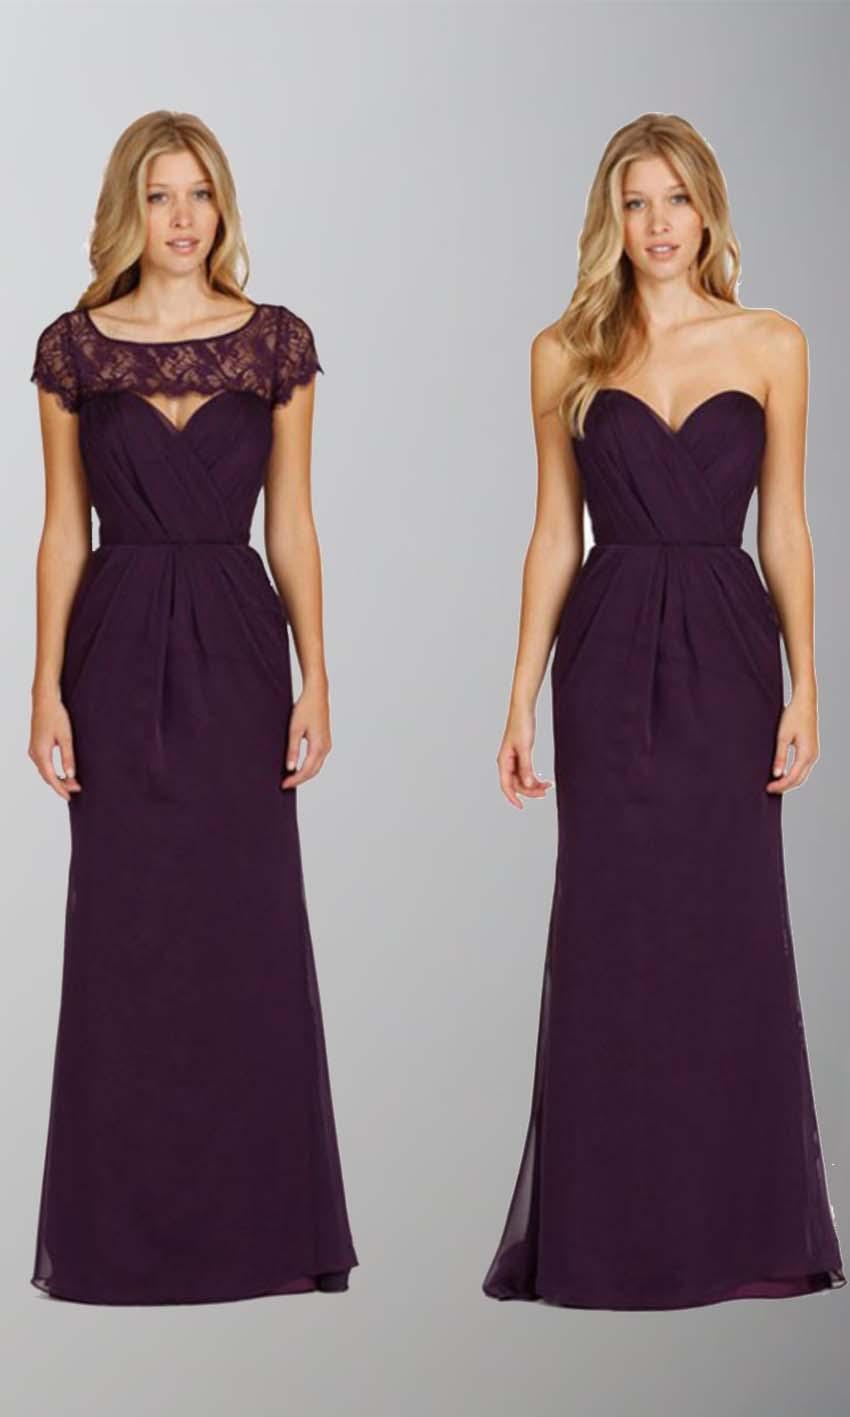 Свадьба - Removable Vest Long Purple Trumpet Bridesmaid Dress KSP405 [KSP405] - £94.00 : Cheap Prom Dresses Uk, Bridesmaid Dresses, 2014 Prom & Evening Dresses, Look for cheap elegant prom dresses 2014, cocktail gowns, or dresses for special occasions? kissprom.co.